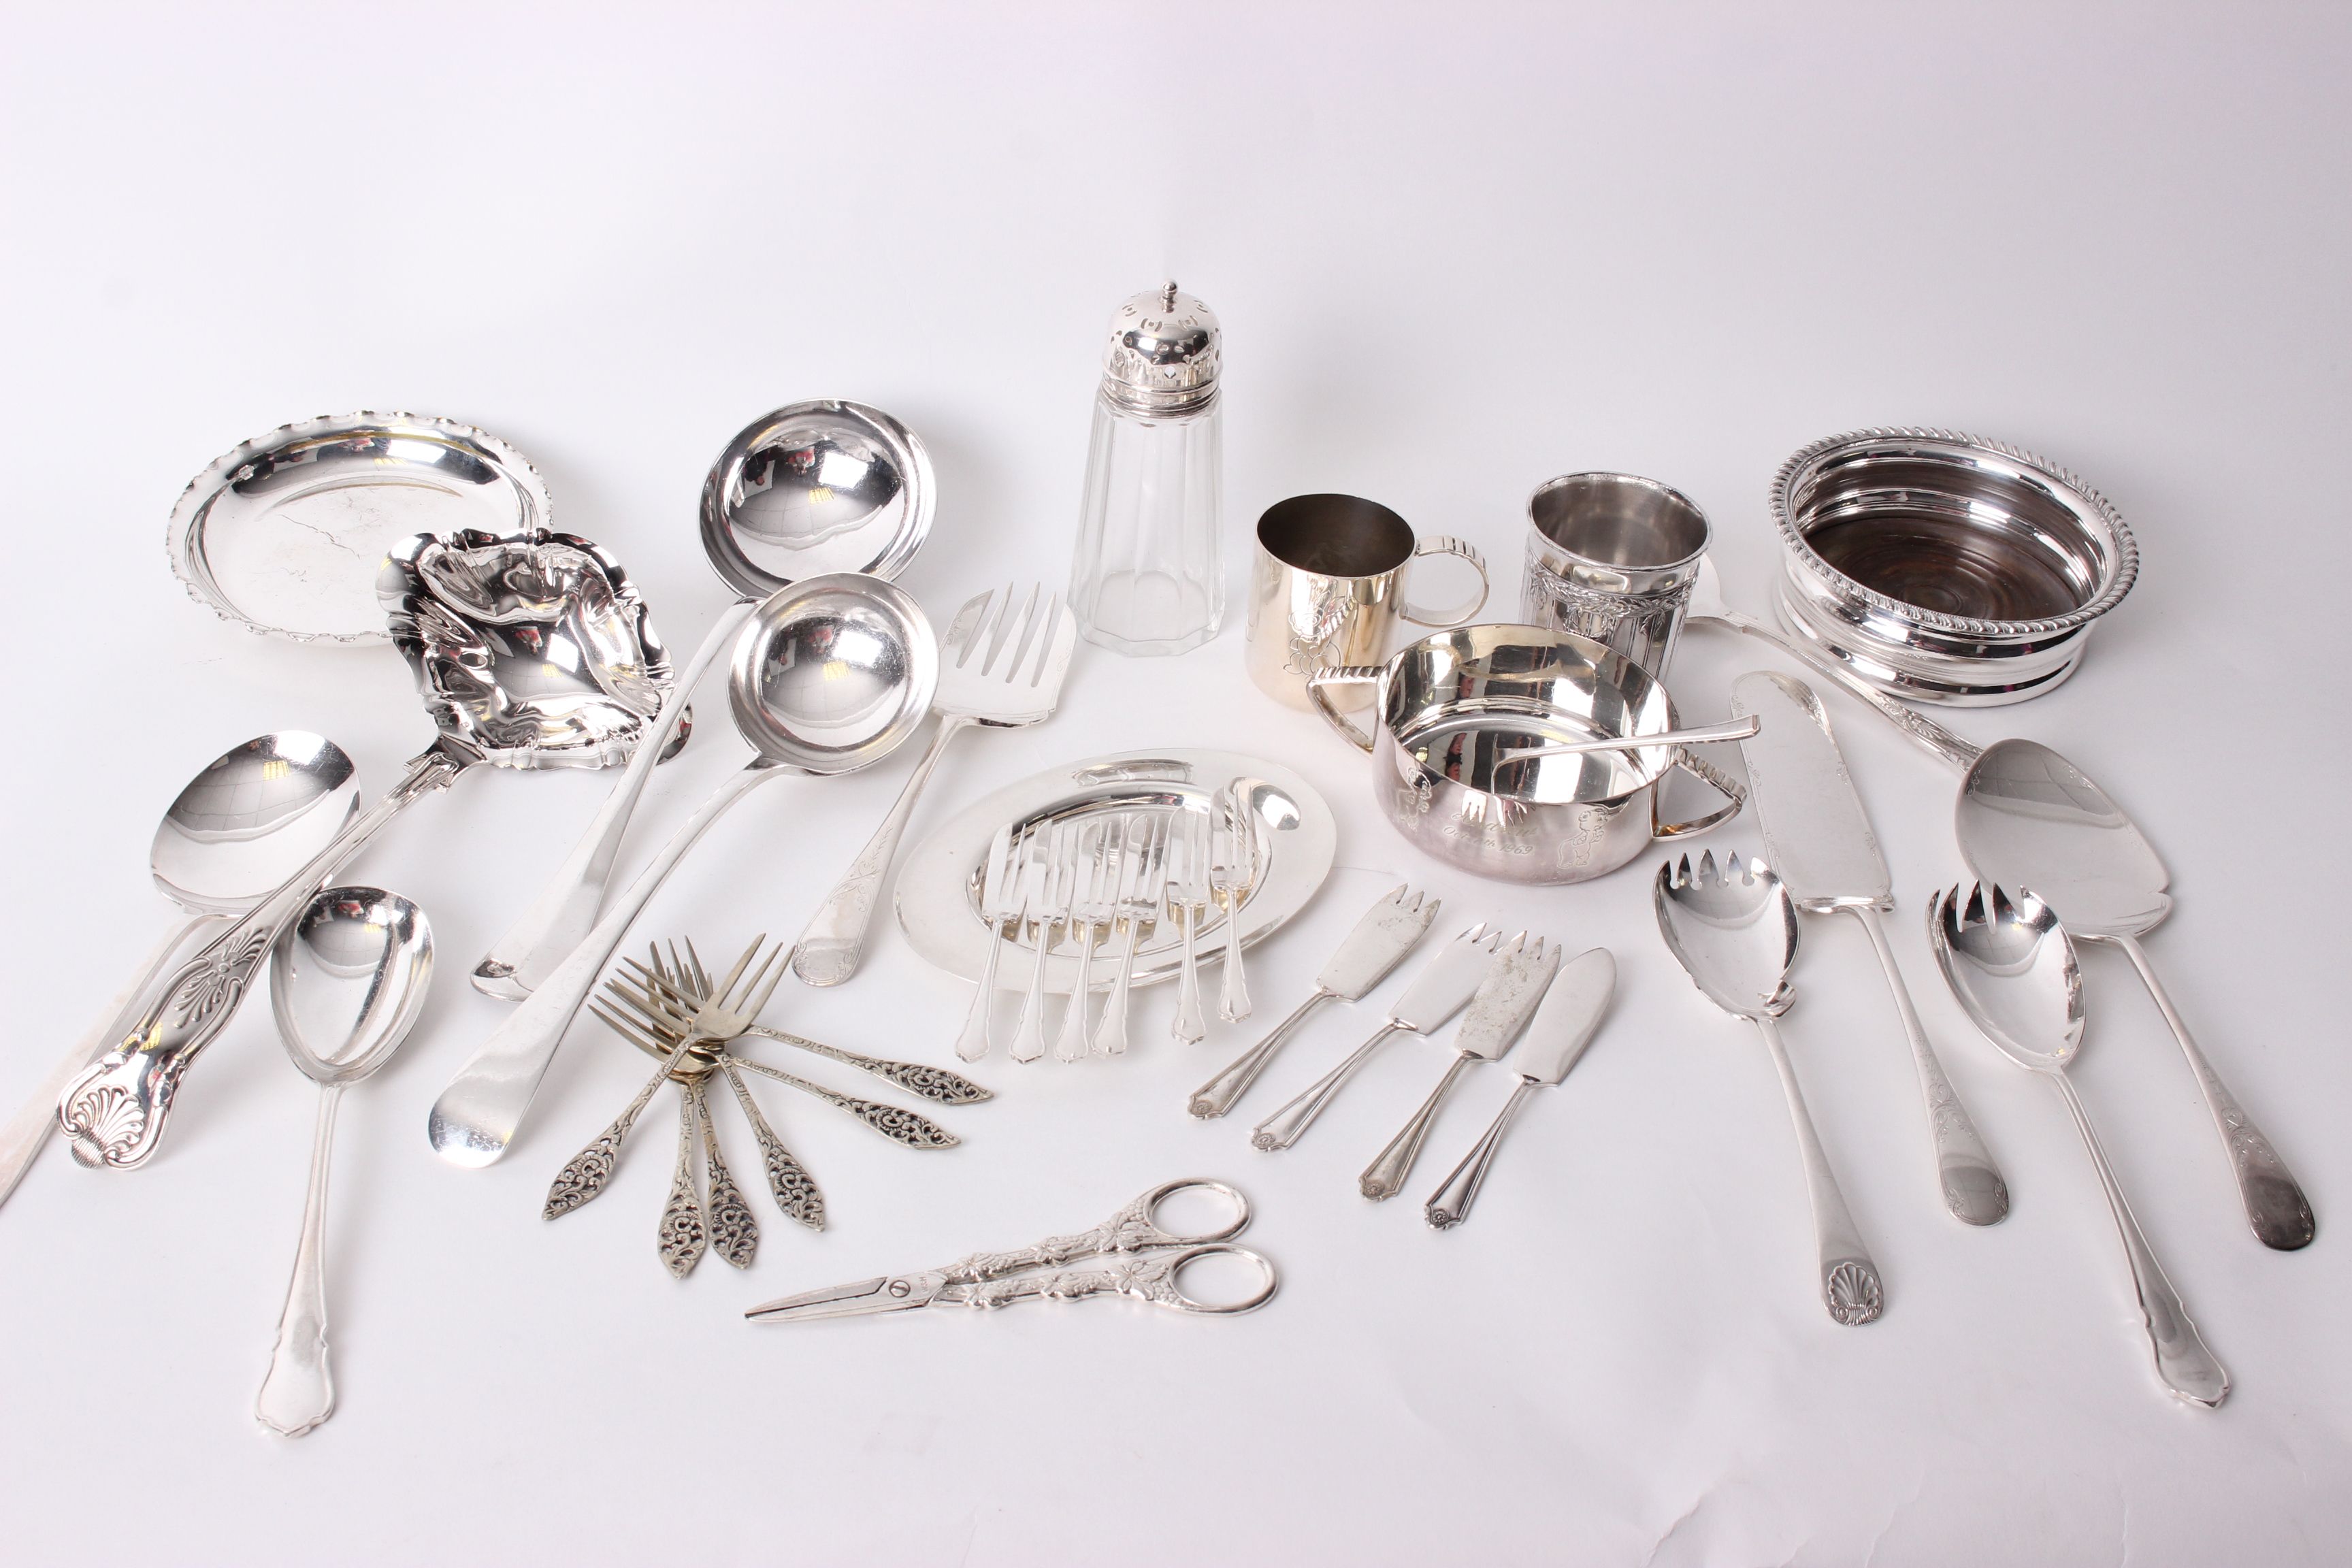 A collection of electroplated wares to include a Christening set, a pair of footed bowls by